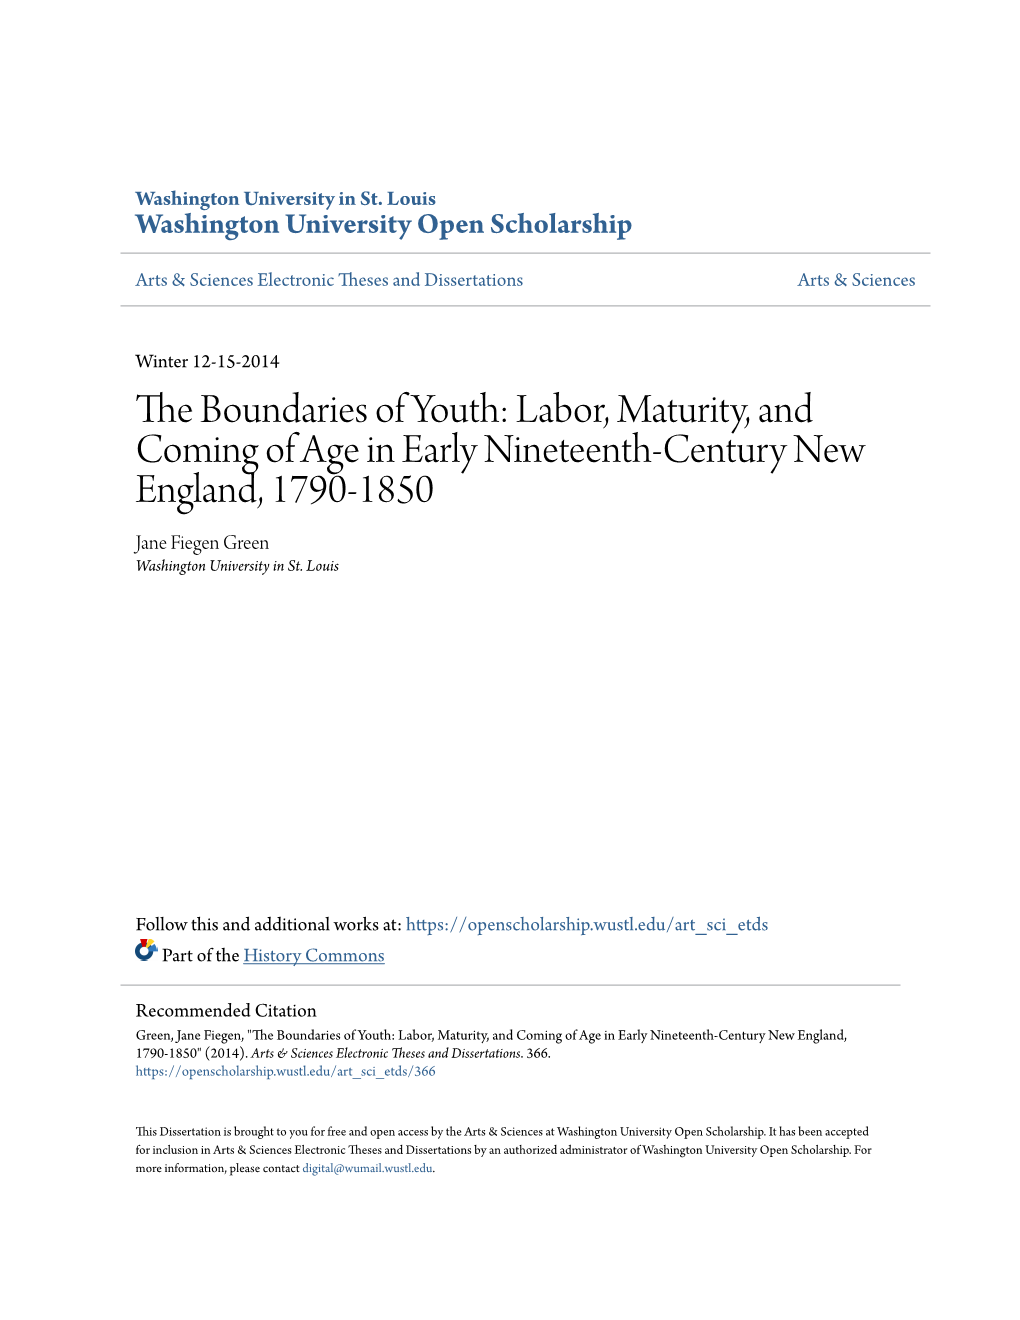 Labor, Maturity, and Coming of Age in Early Nineteenth-Century New England, 1790-1850 Jane Fiegen Green Washington University in St